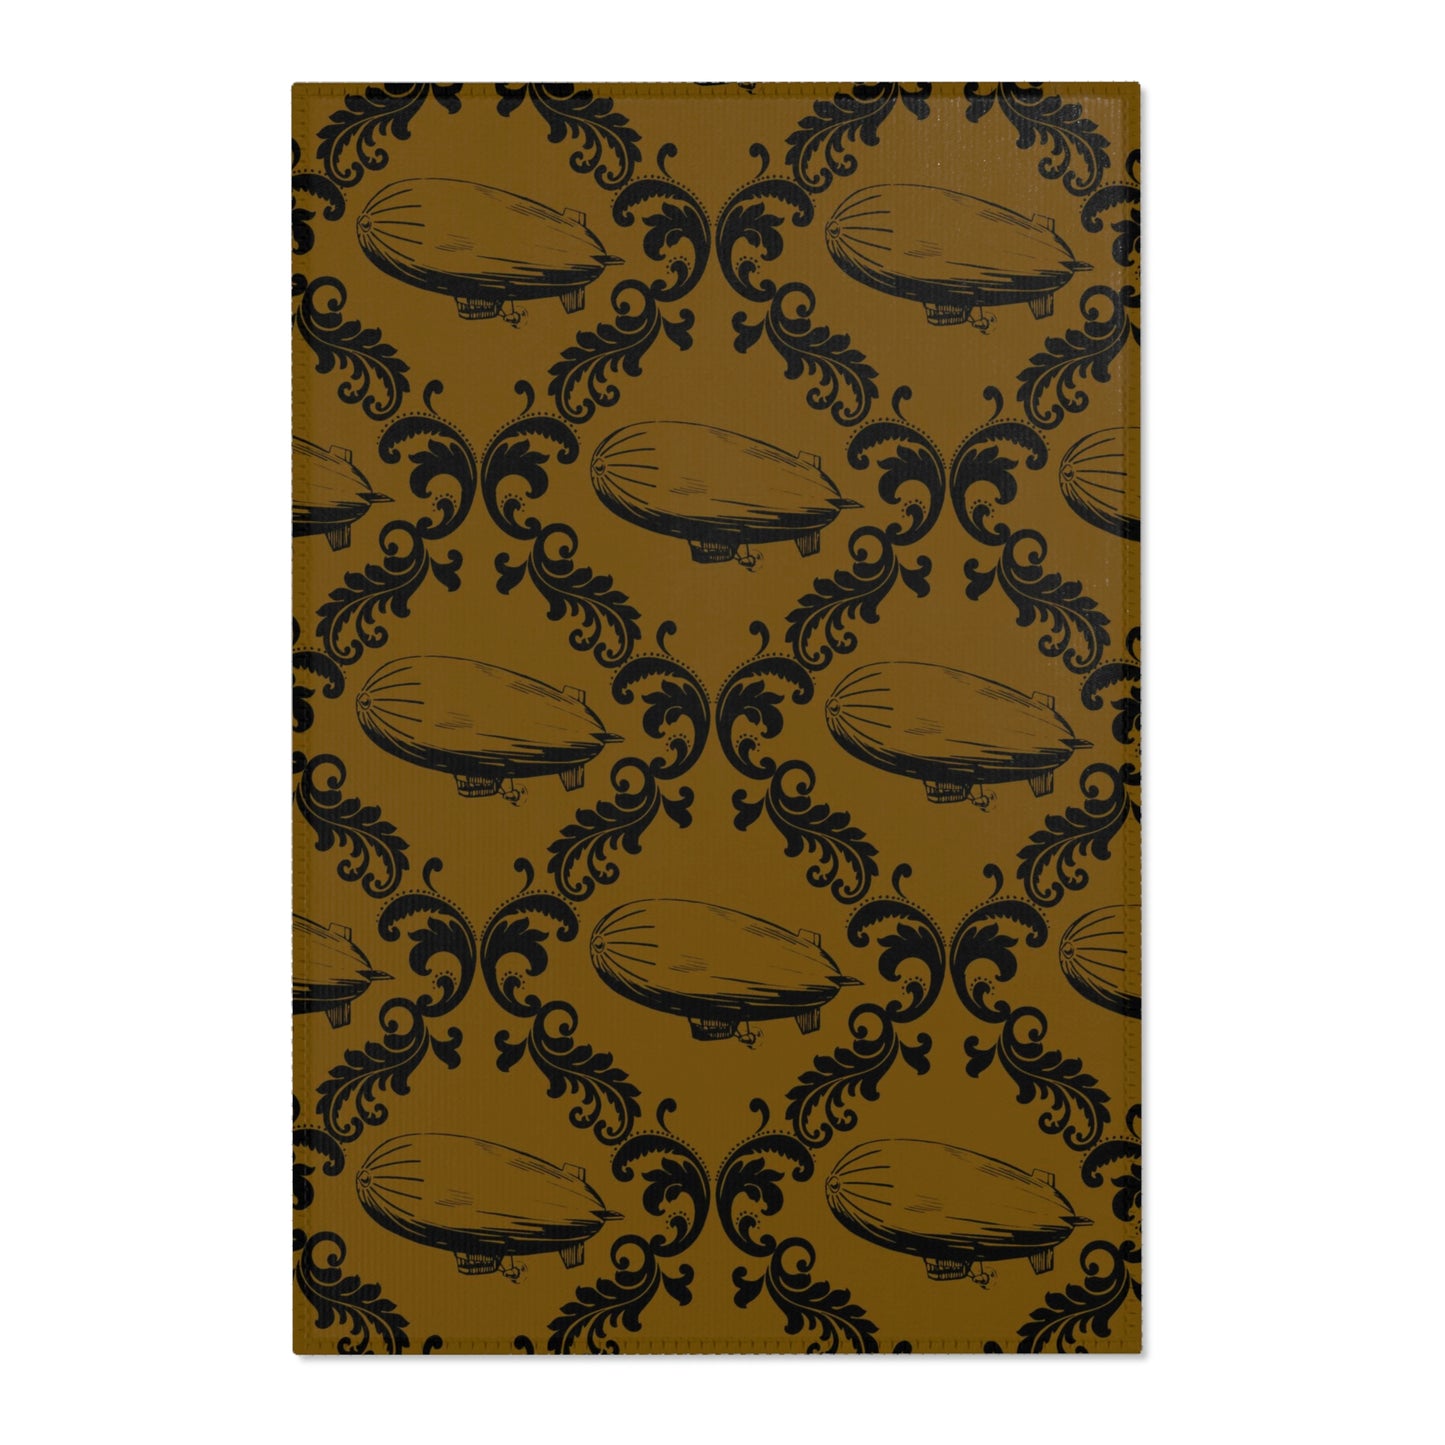 Steampunk Airship Damask Rug Lord and Lady Towers